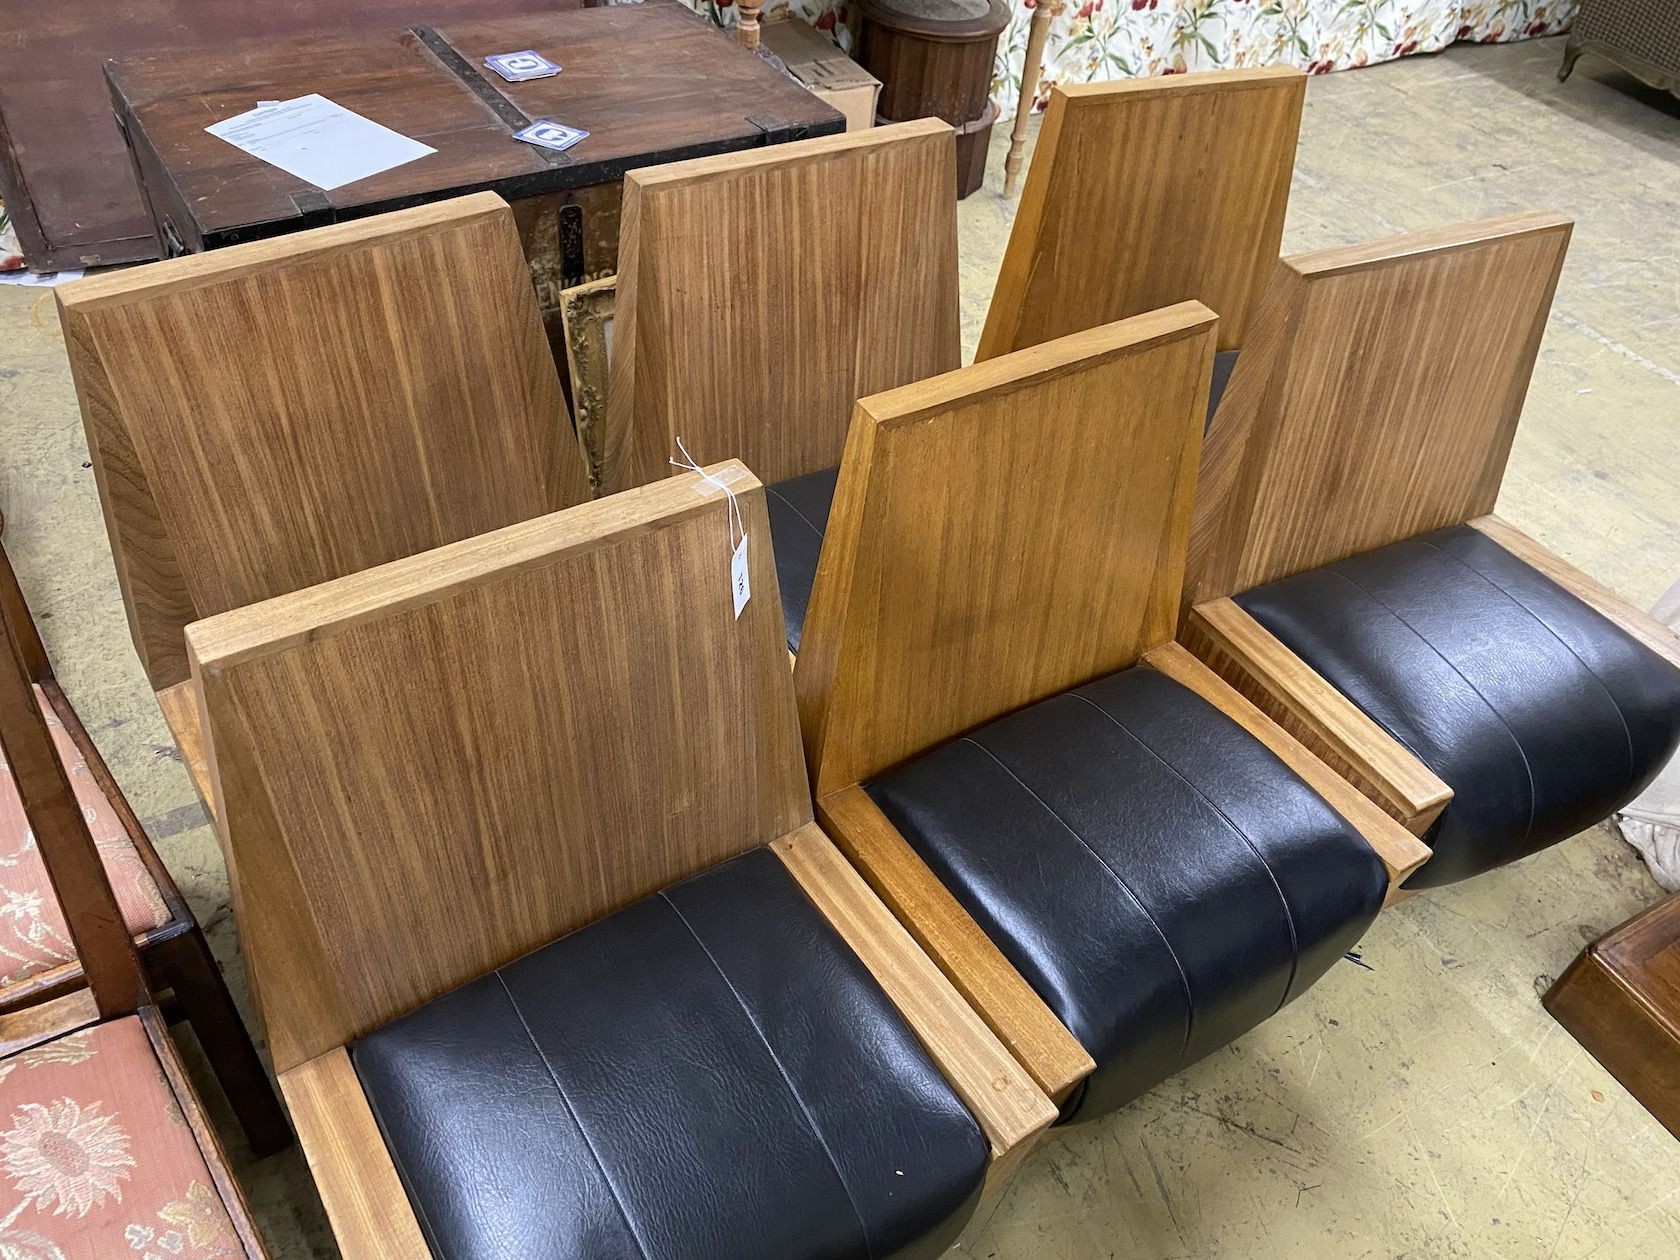 A set of six mid century teak chairs in the Scandinavian style